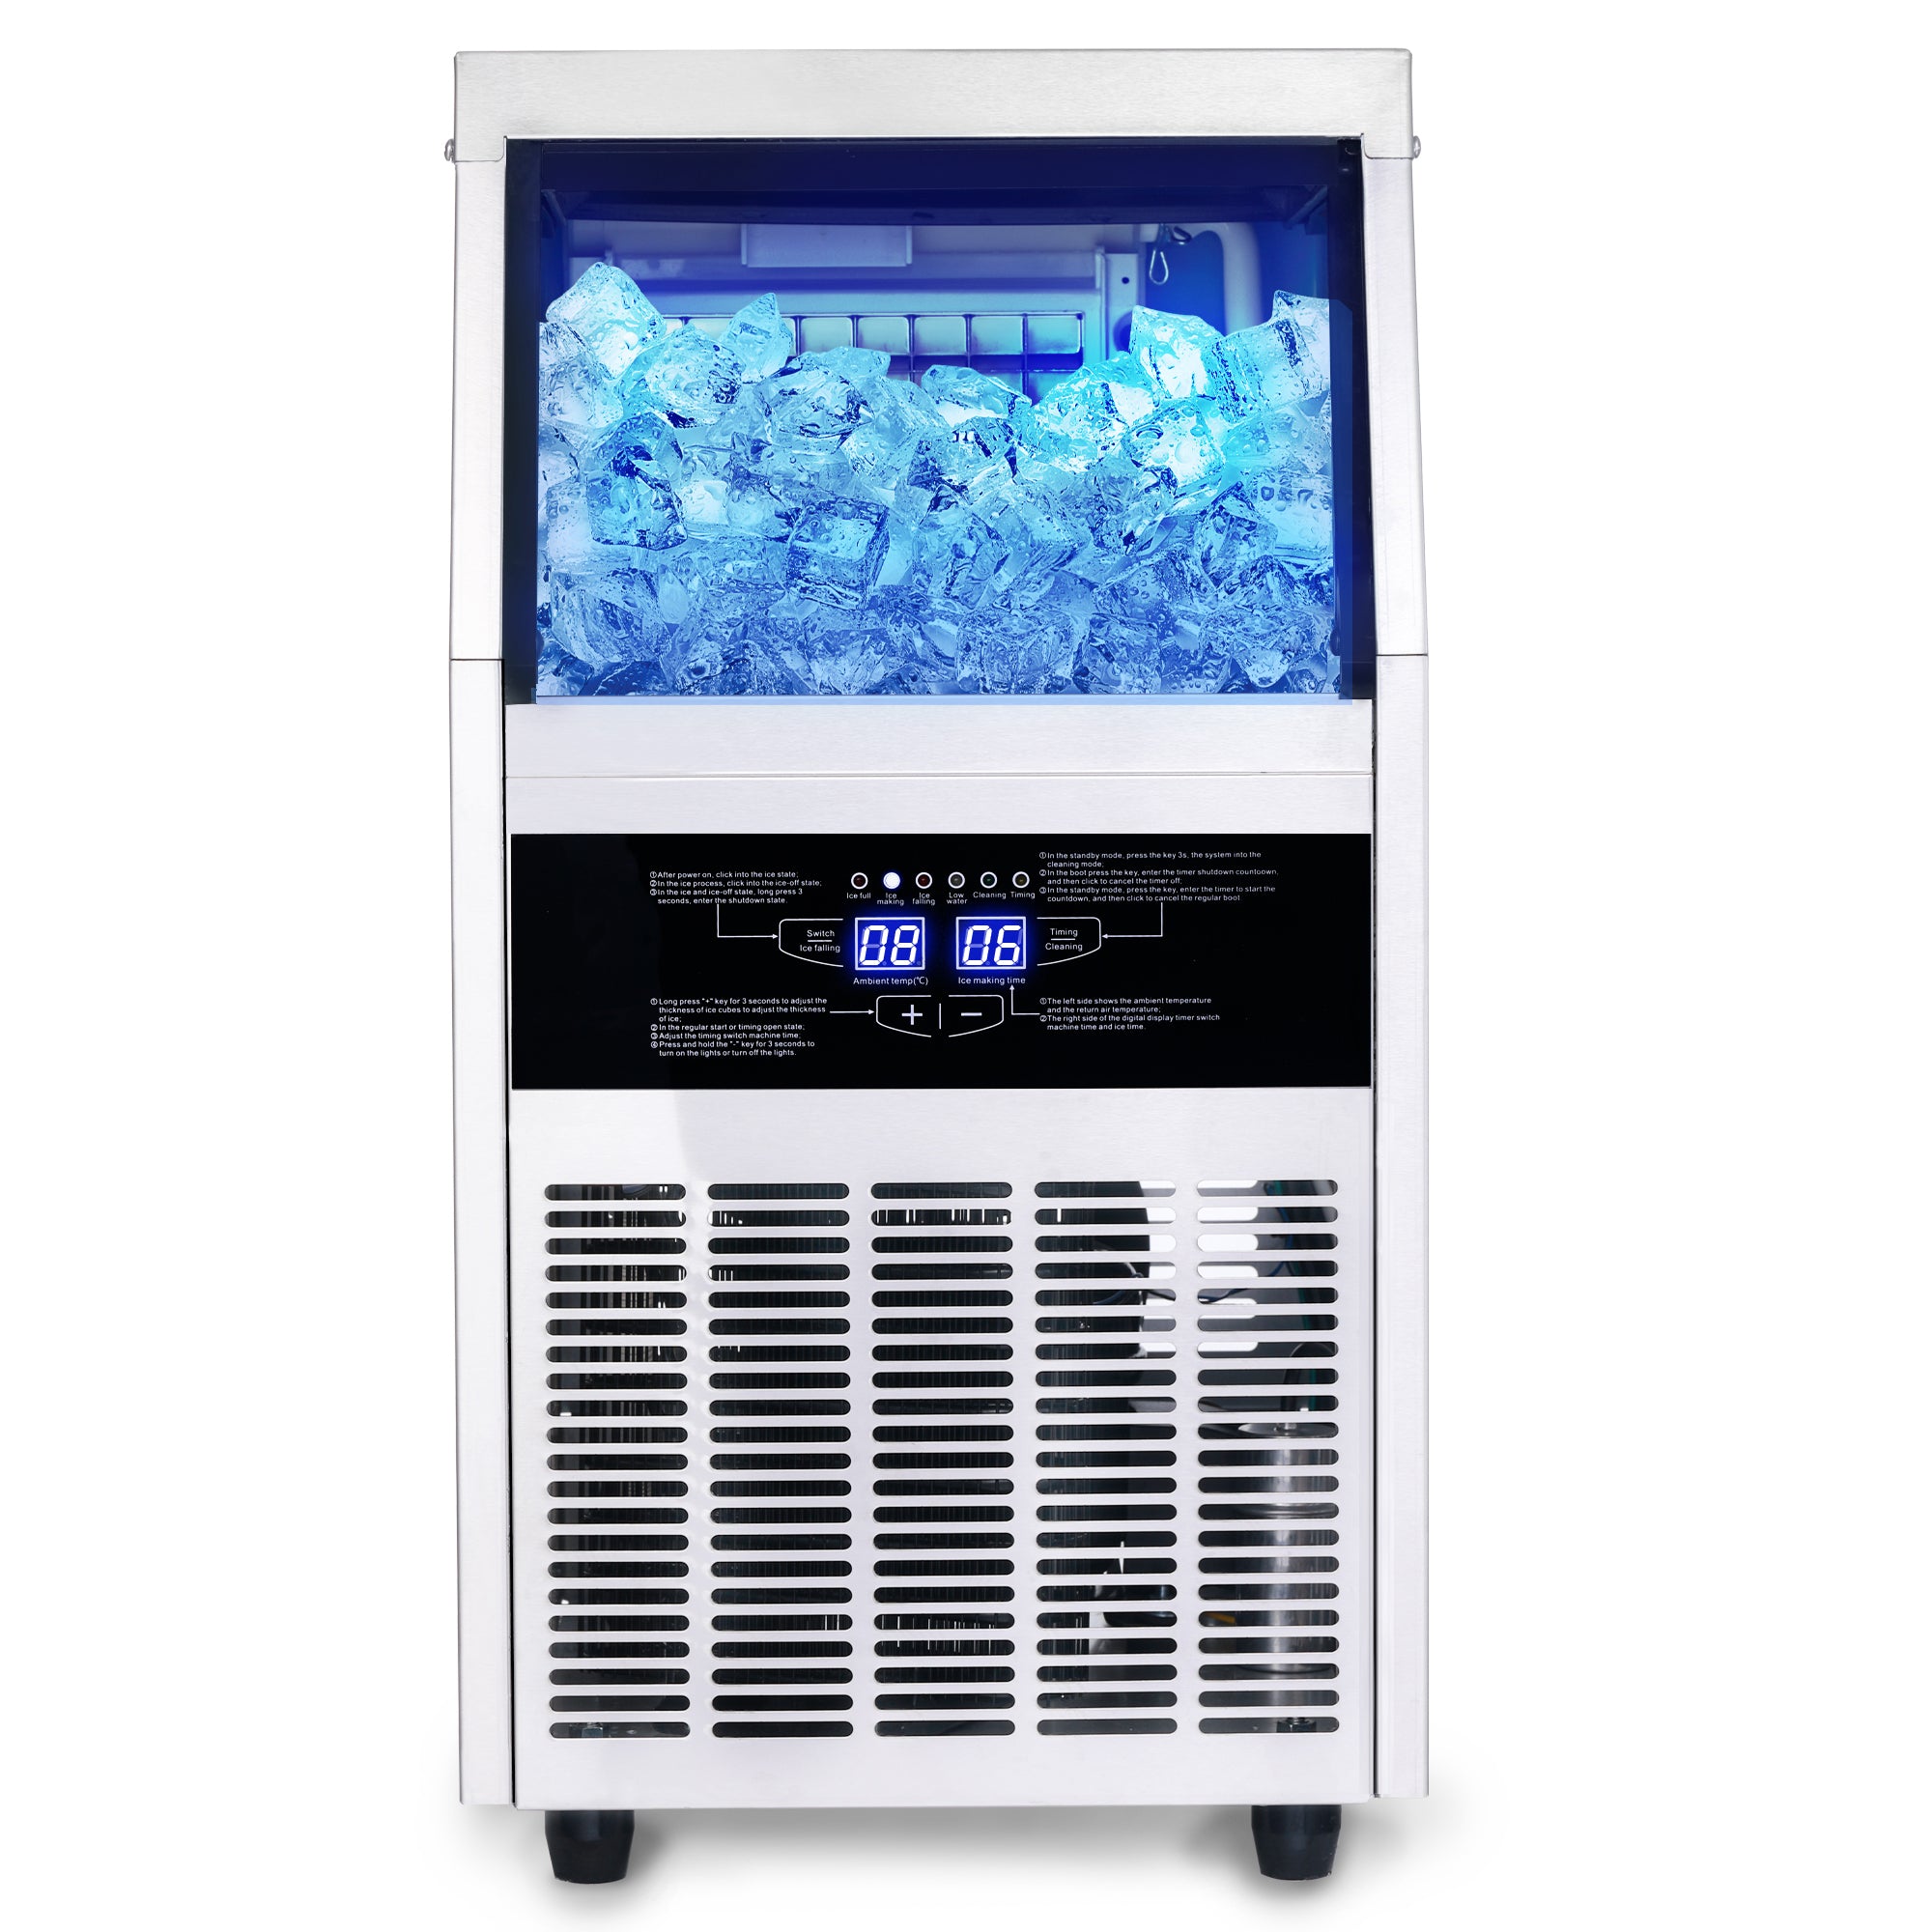 CIM45 - Commercial Ice Maker Machine 120-130LBS/24H